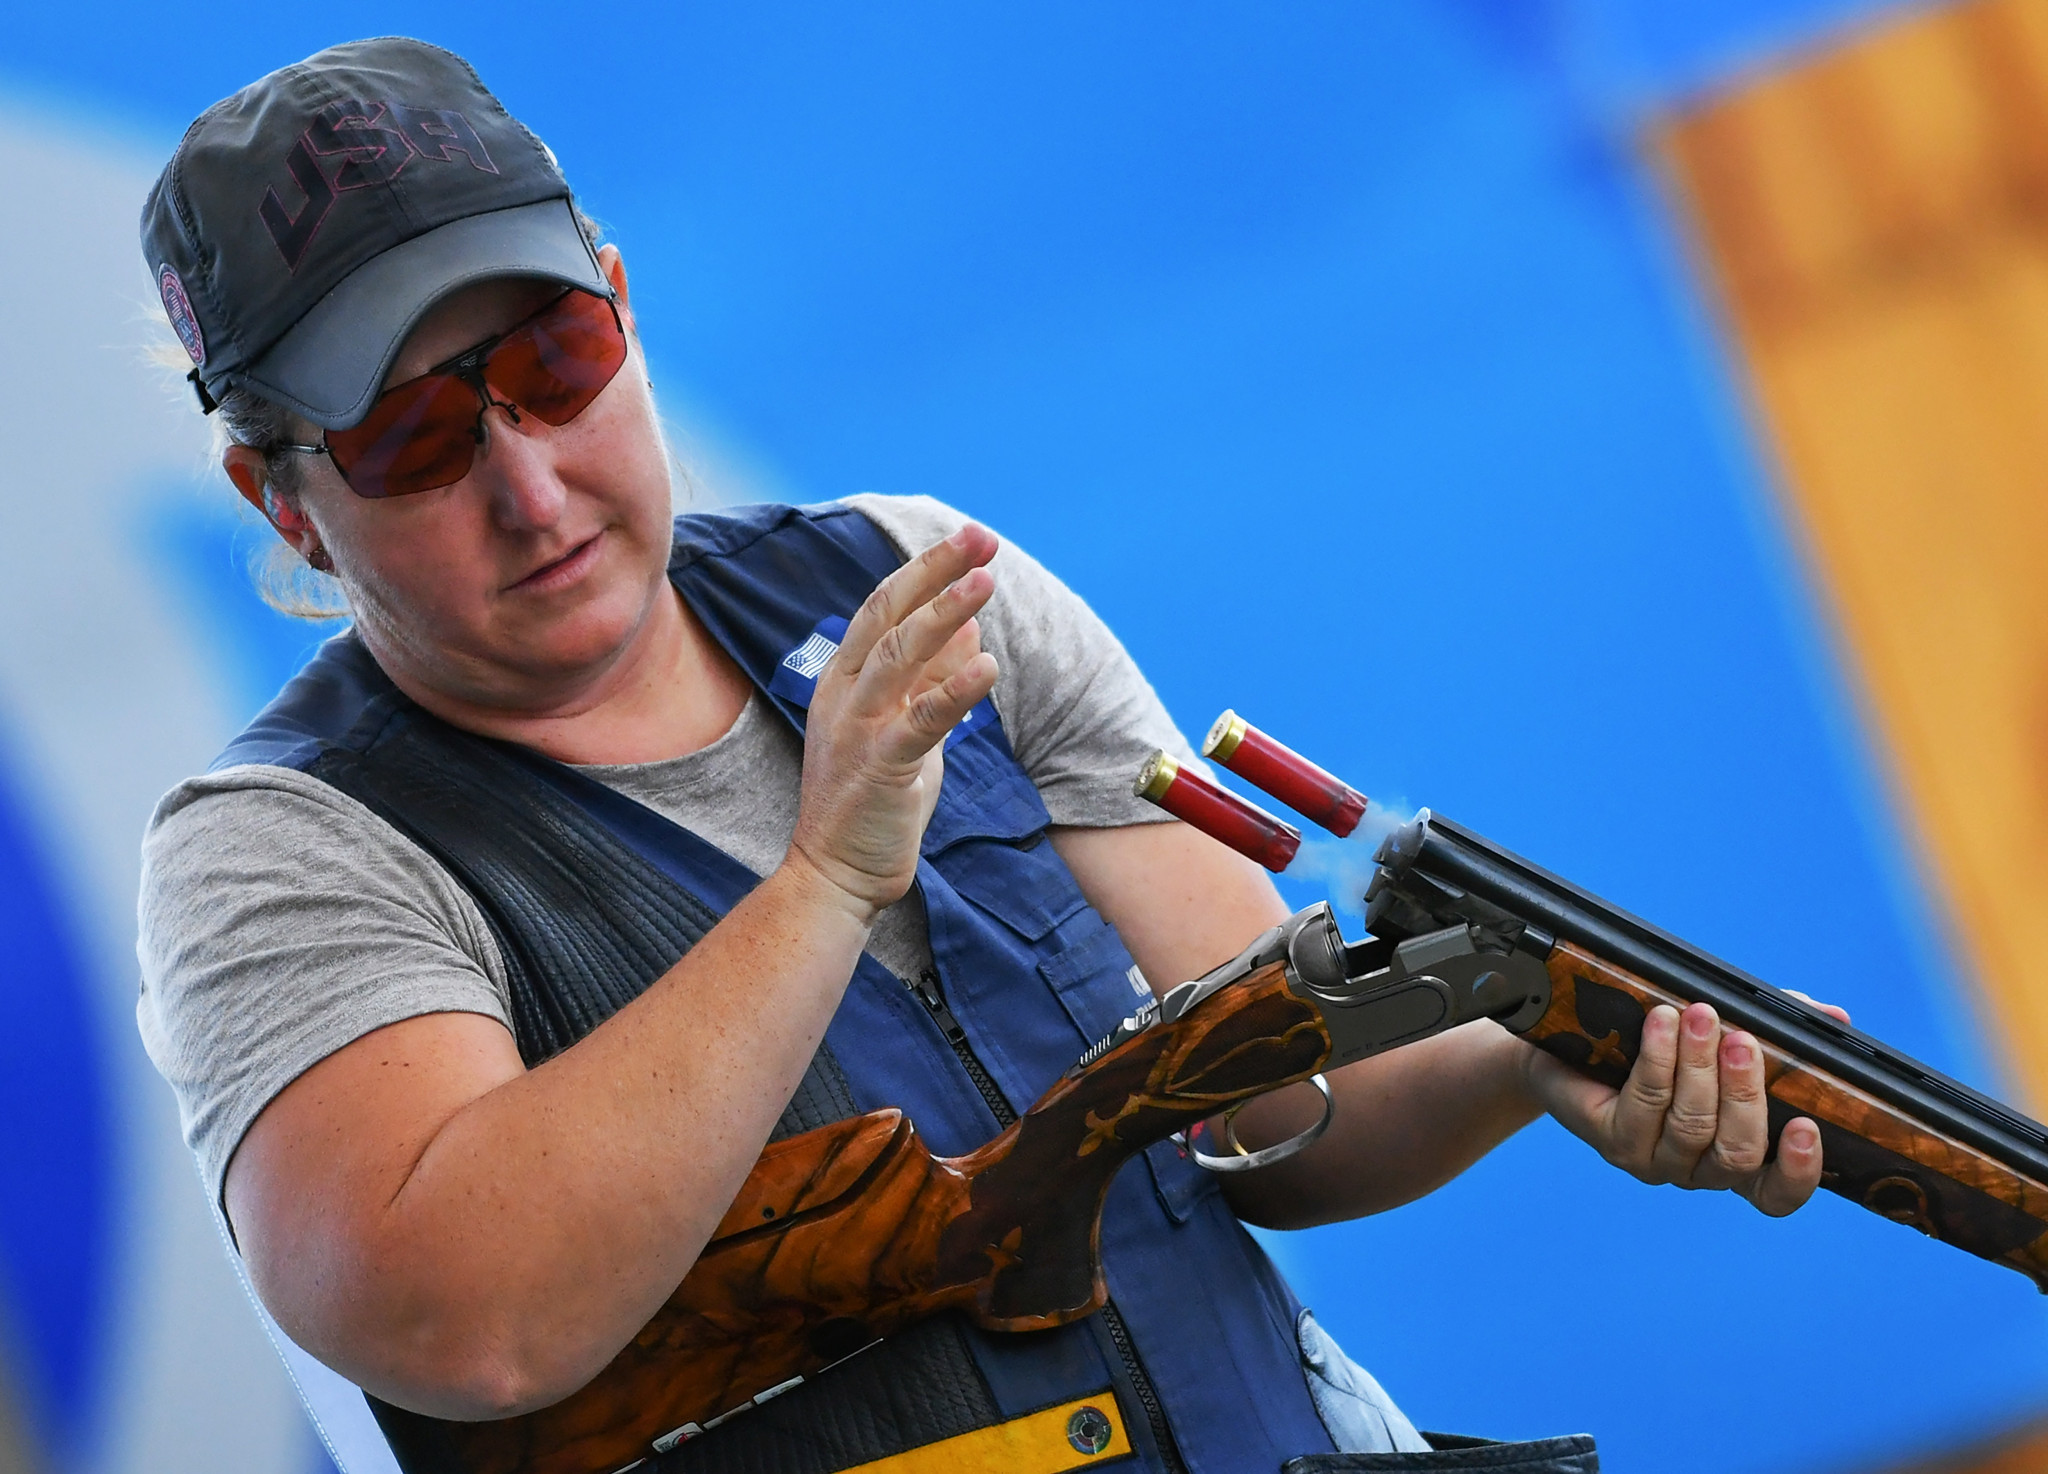 Kimberley Rhode won her third consecutive ISSF Shotgun World Cup women's skeet title in Changwon ©Getty Images